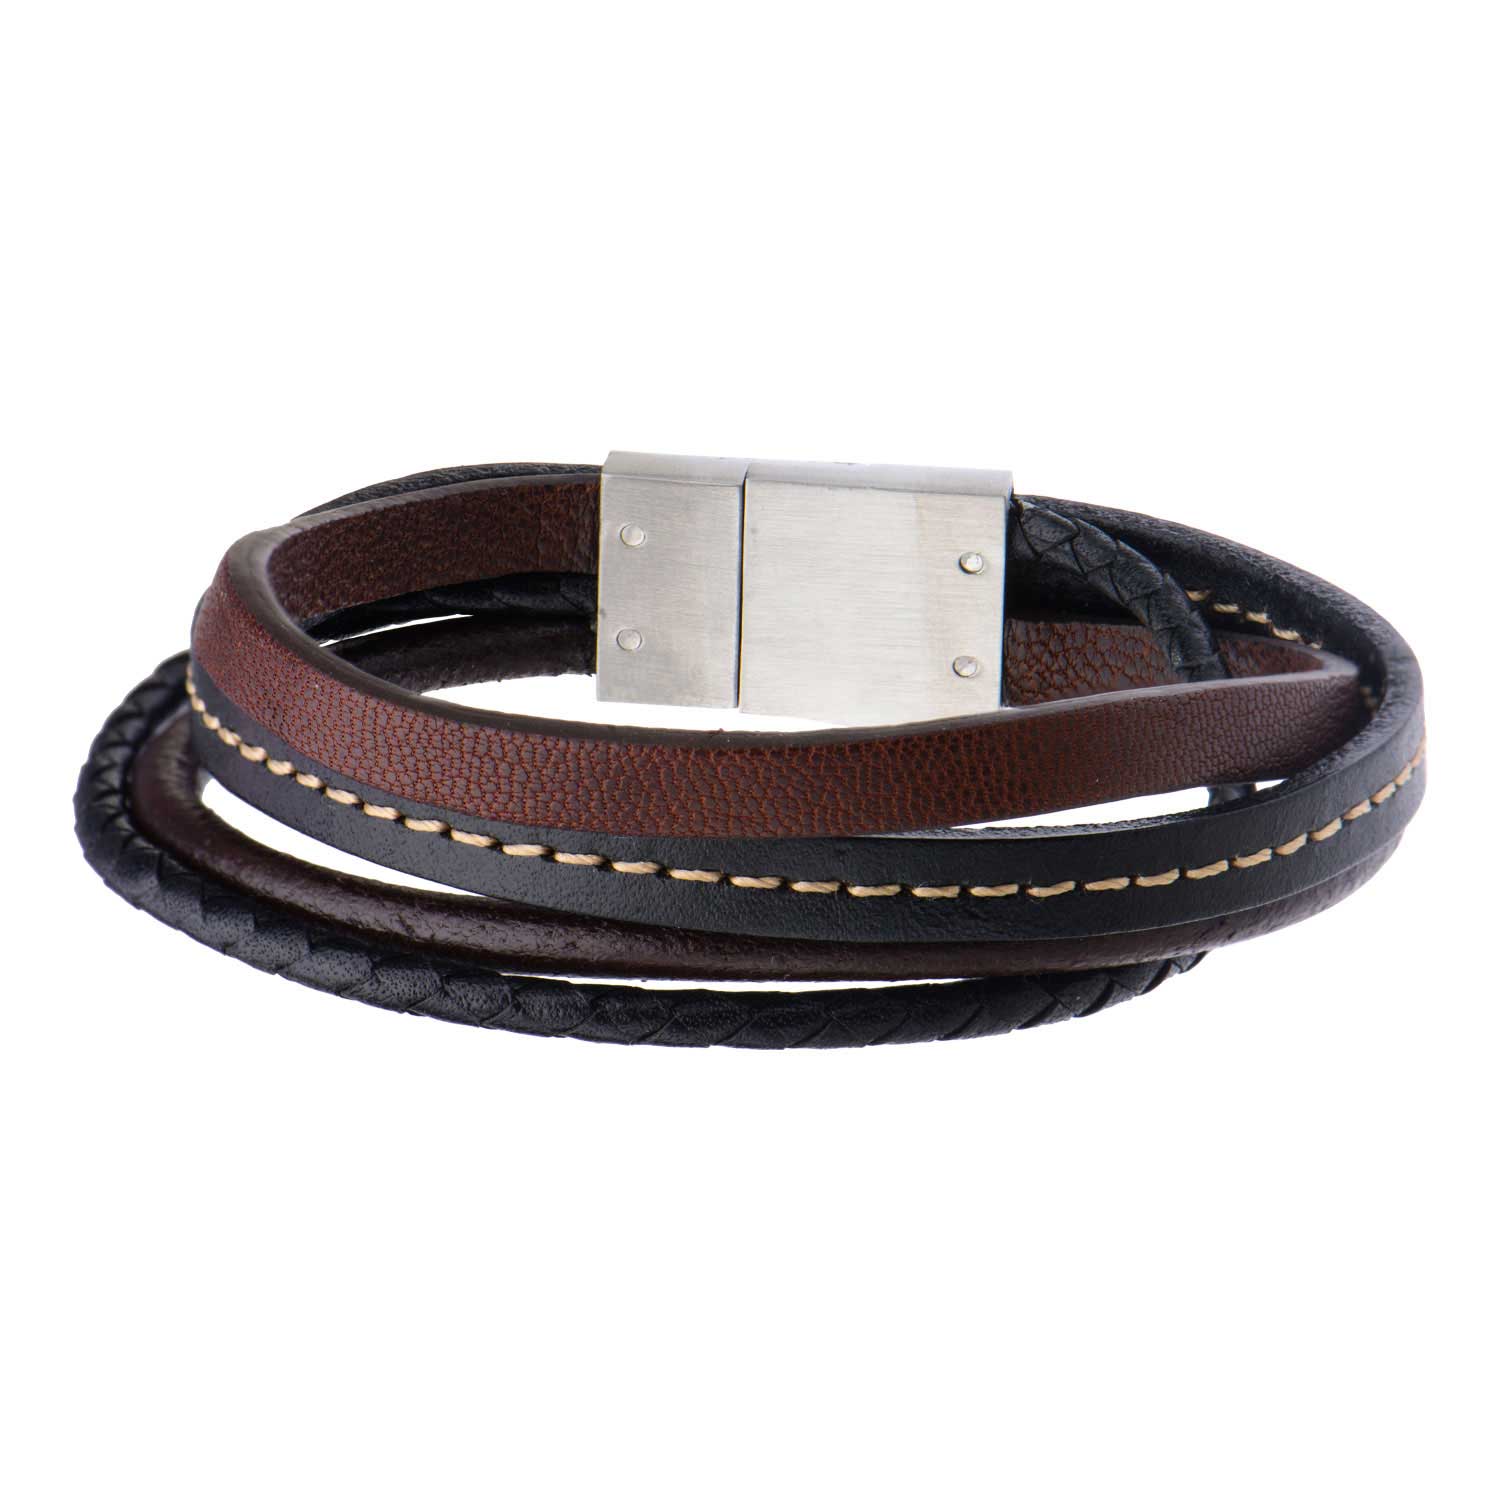 Brown and Black Leather in Brown Thread Layered Bracelet Lewis Jewelers, Inc. Ansonia, CT